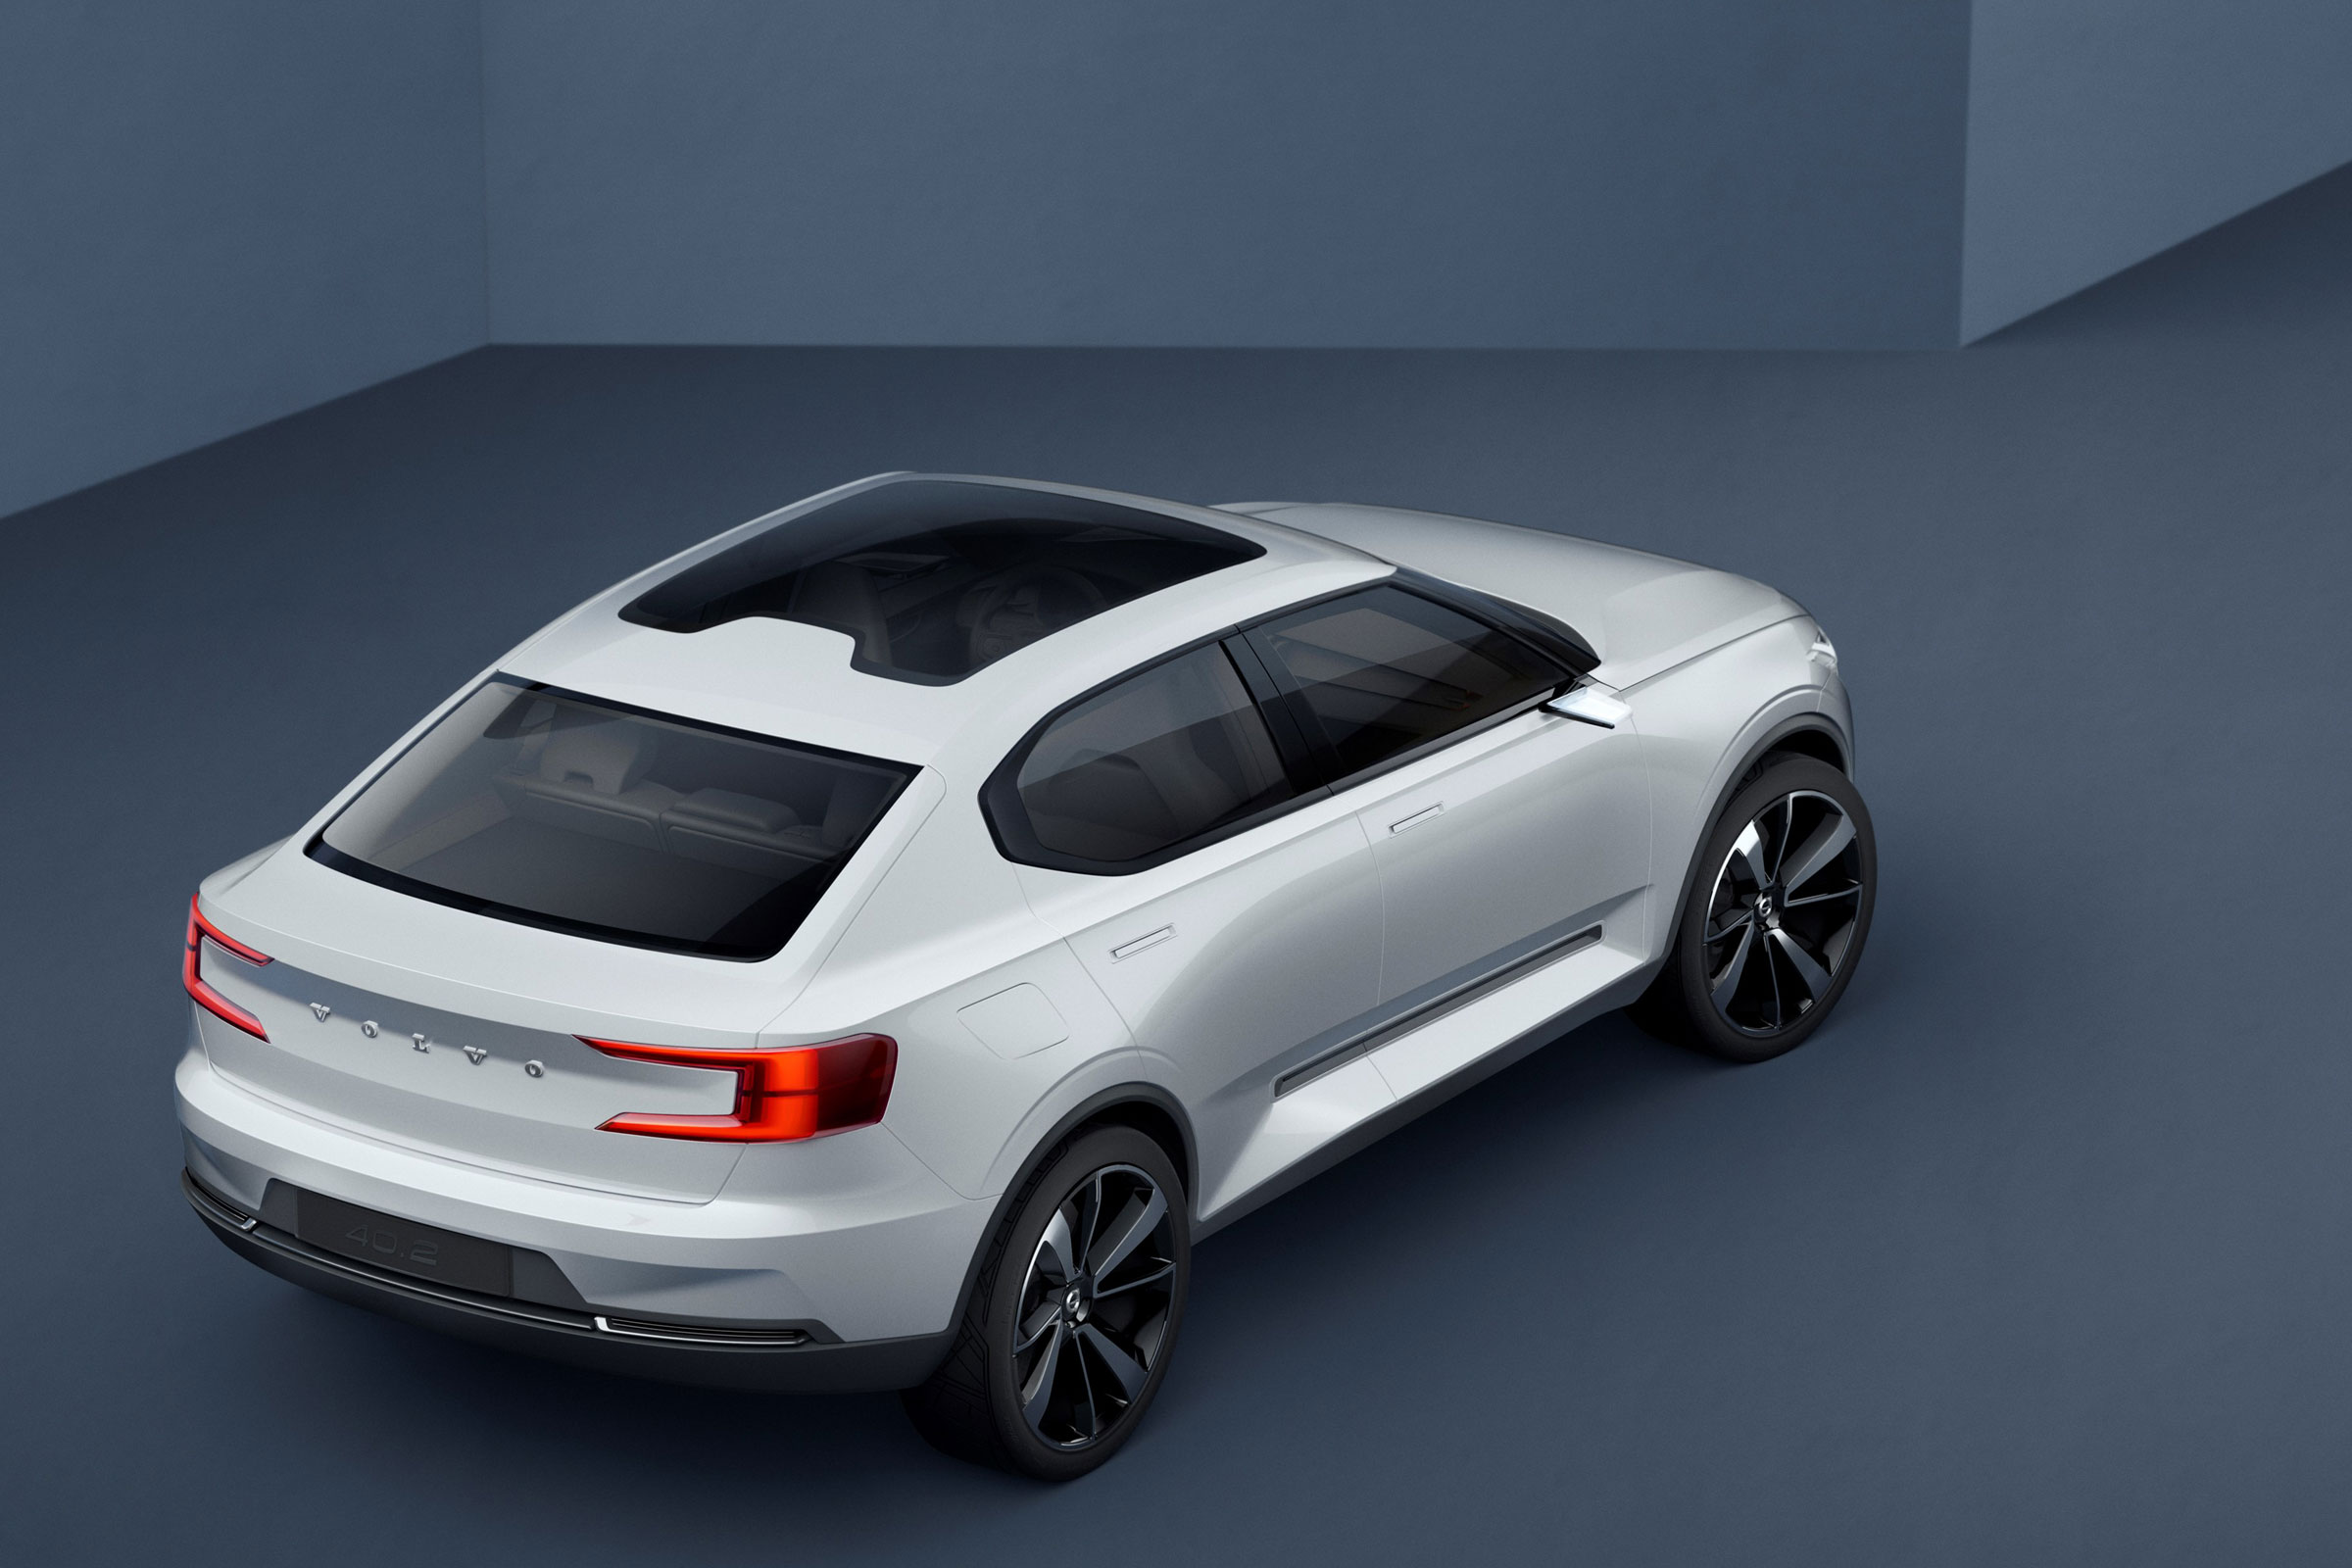 New 2022 Polestar 3 to be SUV based on Precept concept car  Auto Express